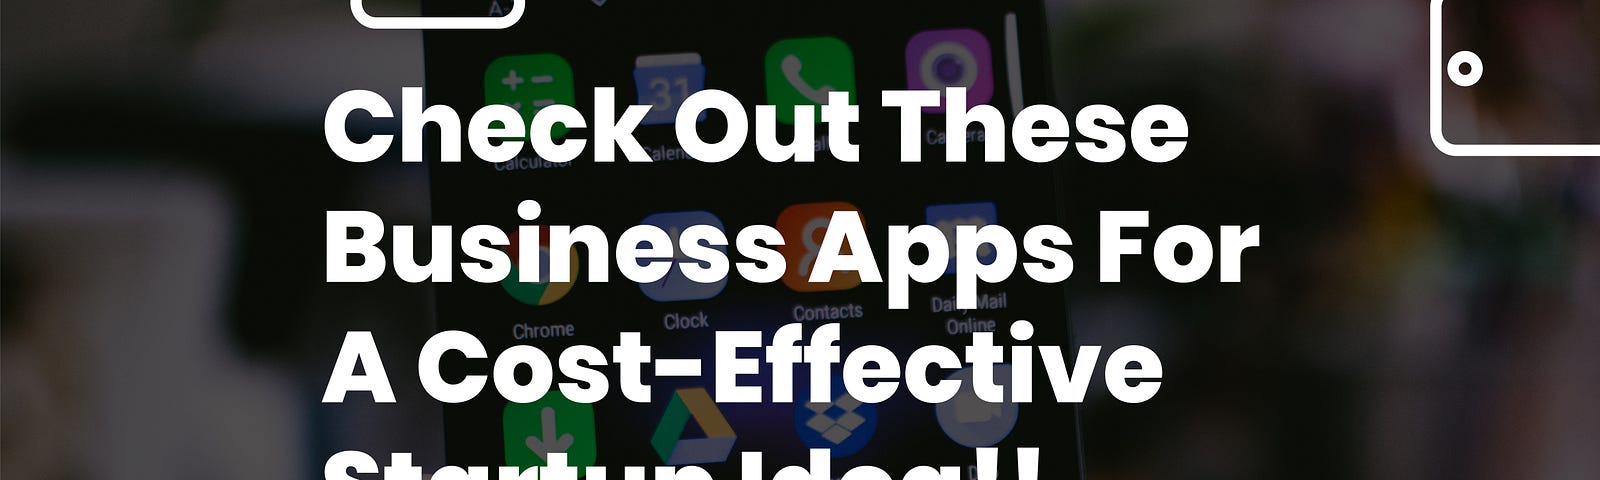 Business apps help in cost effective business